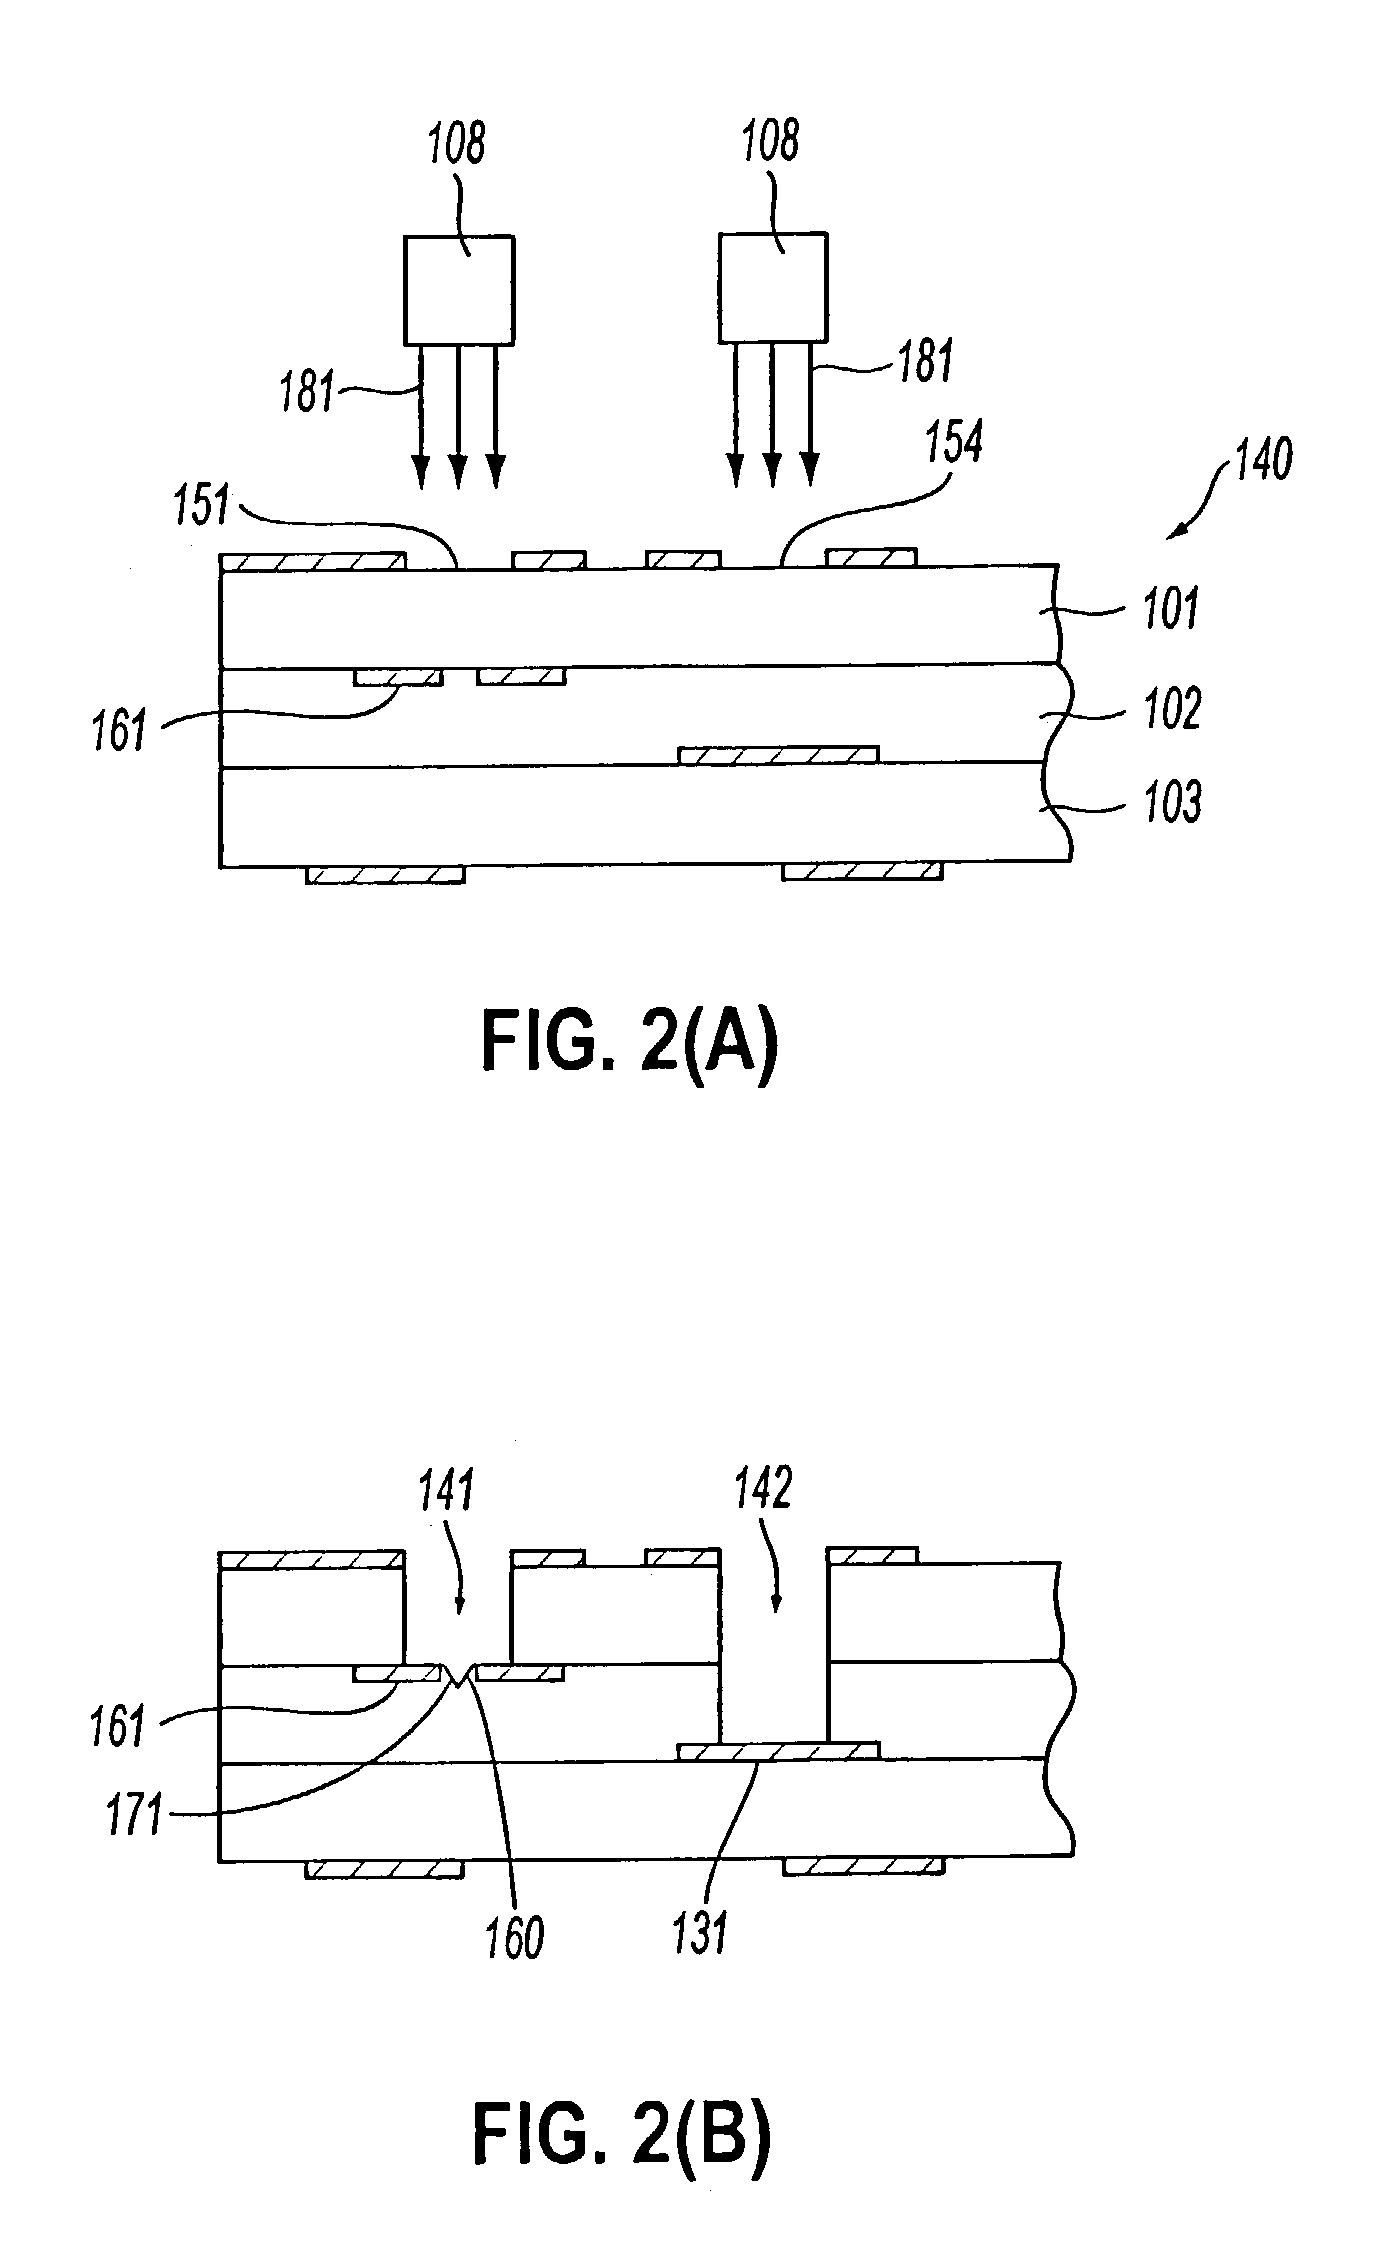 Method of manufacturing a printed wiring board having a previously formed opening hole in an innerlayer conductor circuit